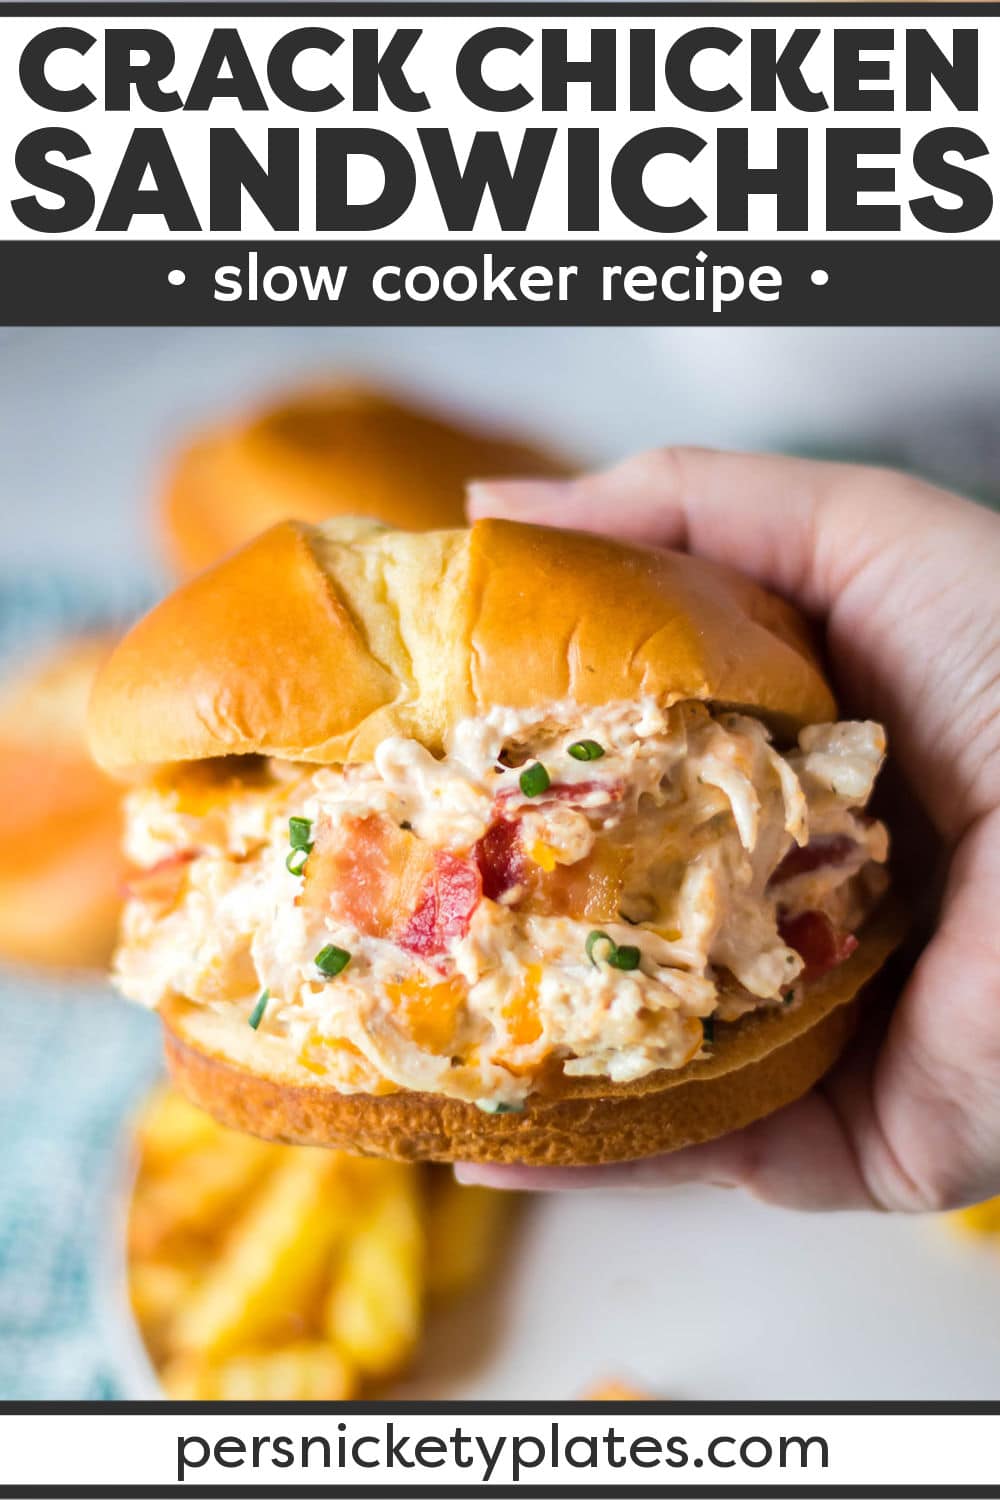 Slow Cooker Chicken Bacon Ranch Sandwiches (aka Crack Chicken) are an easy hit!  Chicken, cream cheese, and ranch seasoning cook together in the crockpot before getting mixed with cheddar, bacon, and scallions and then piled onto soft buns. | www.persnicketyplates.com